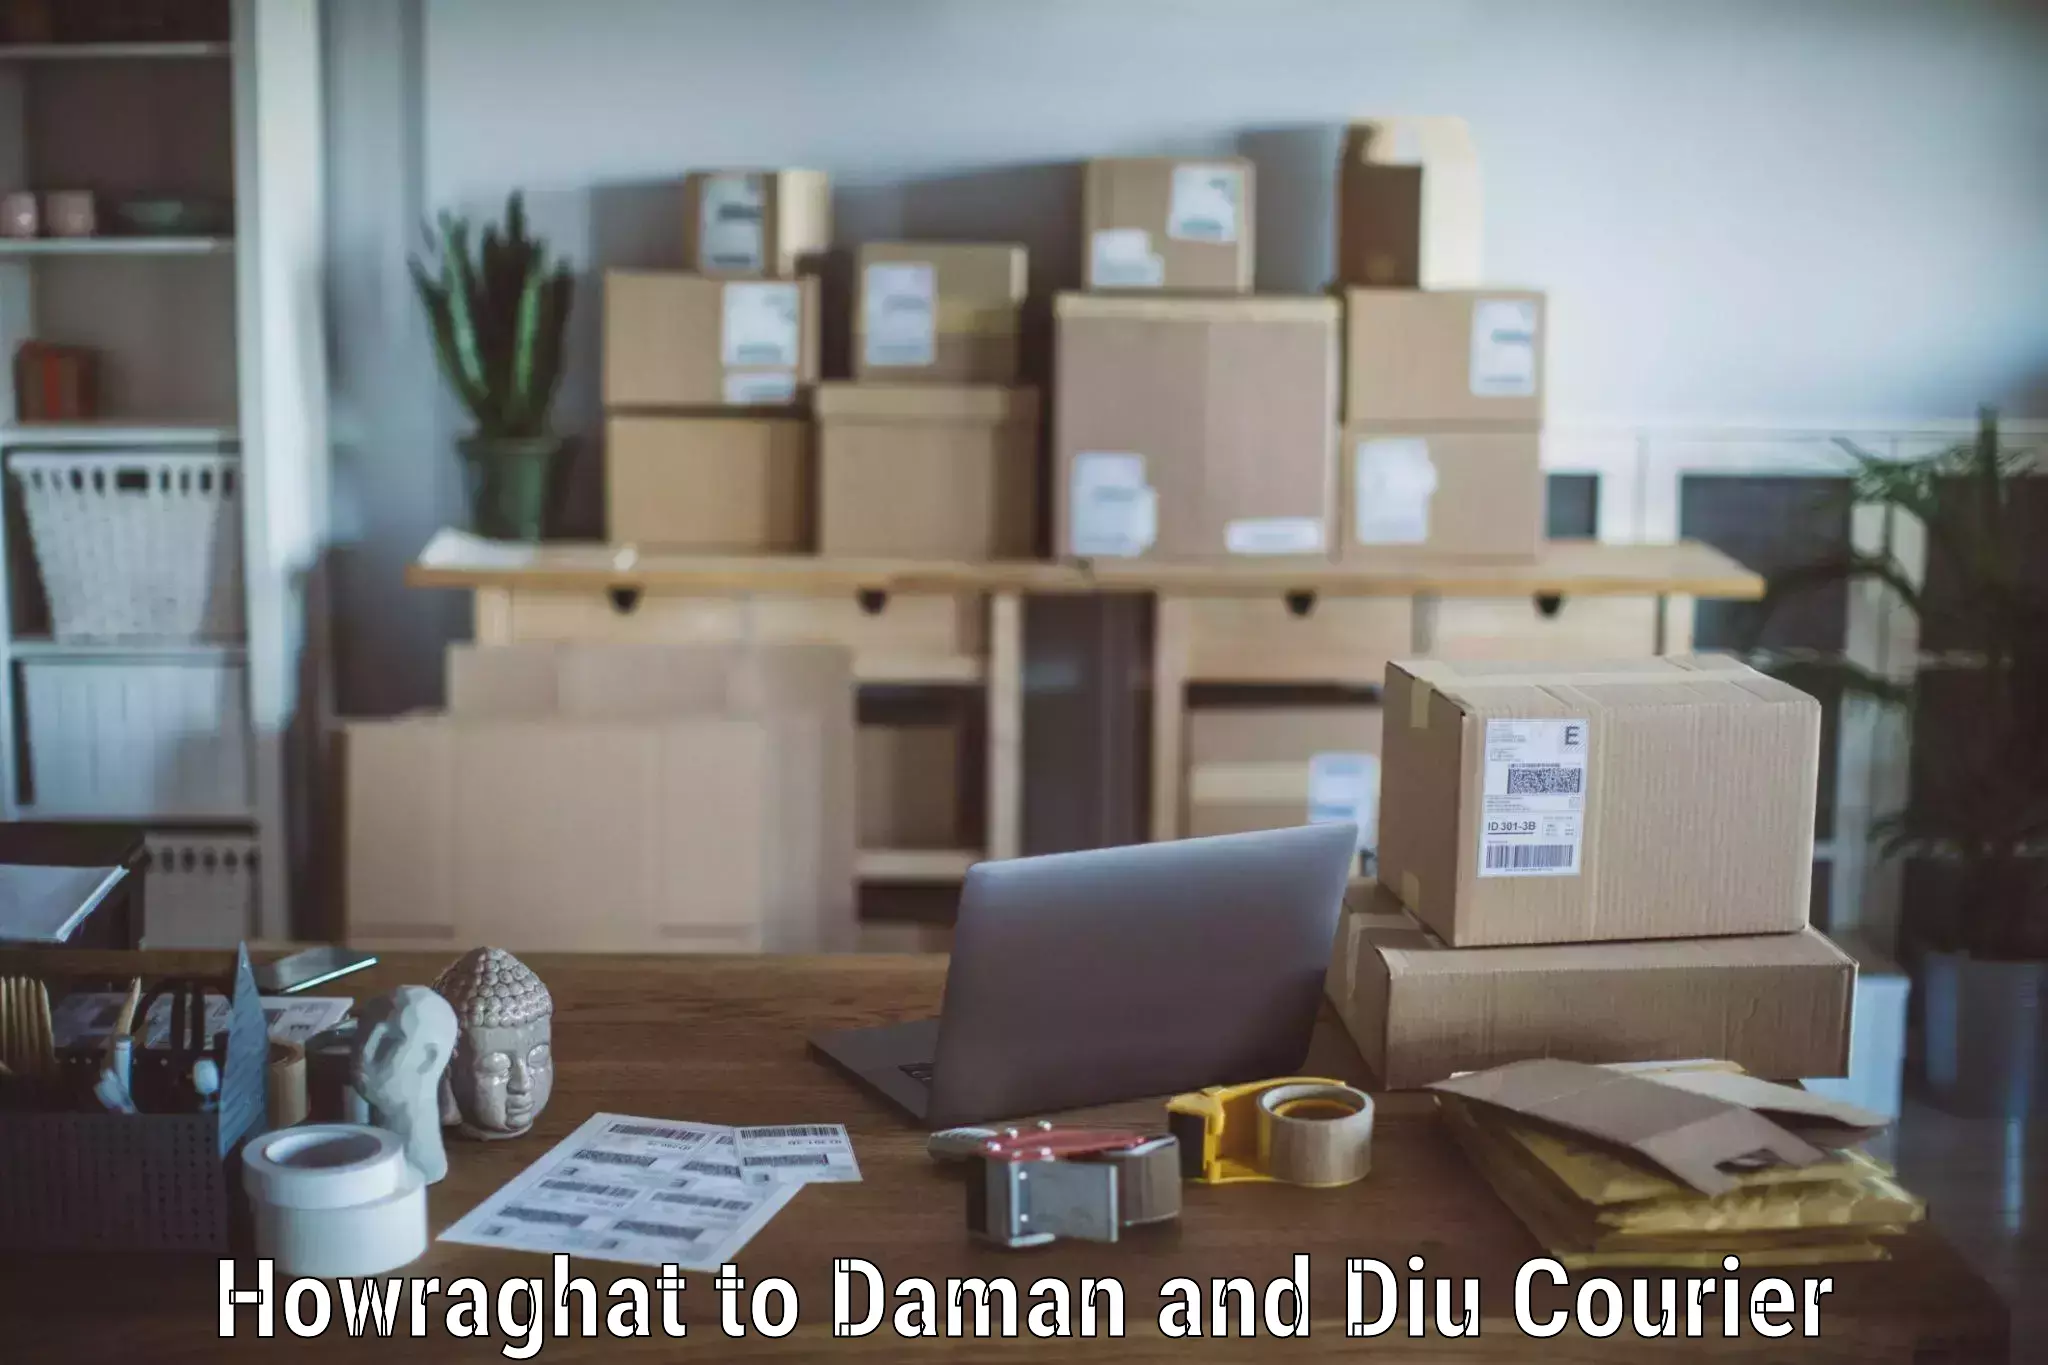 Moving and packing experts Howraghat to Daman and Diu